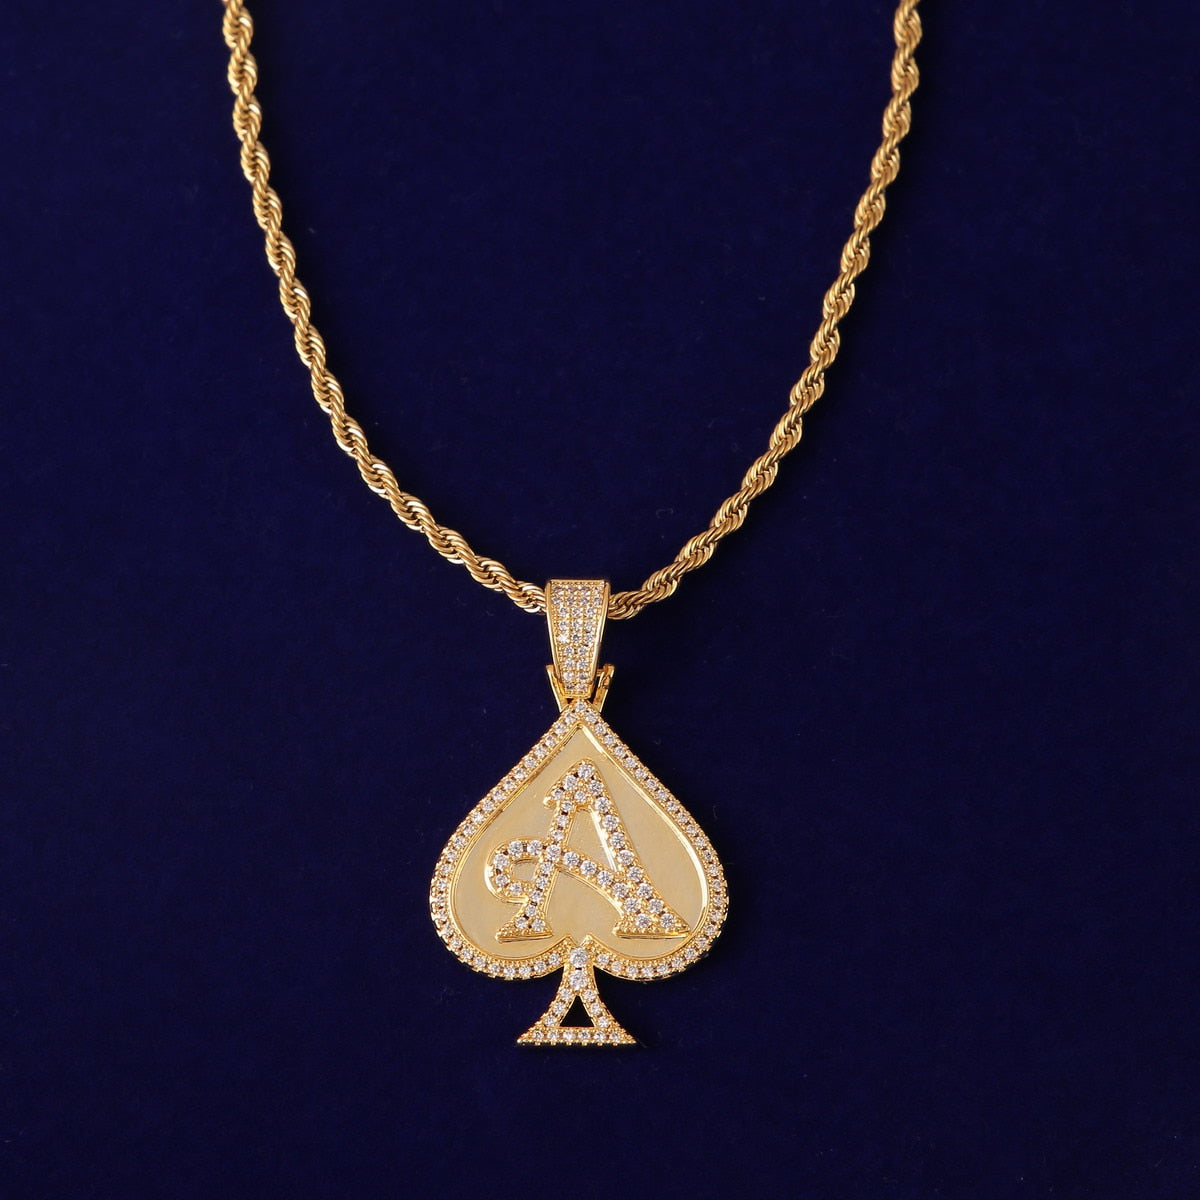 Pikes Ace Poker Pendant in Gold/White Gold/Rose Gold